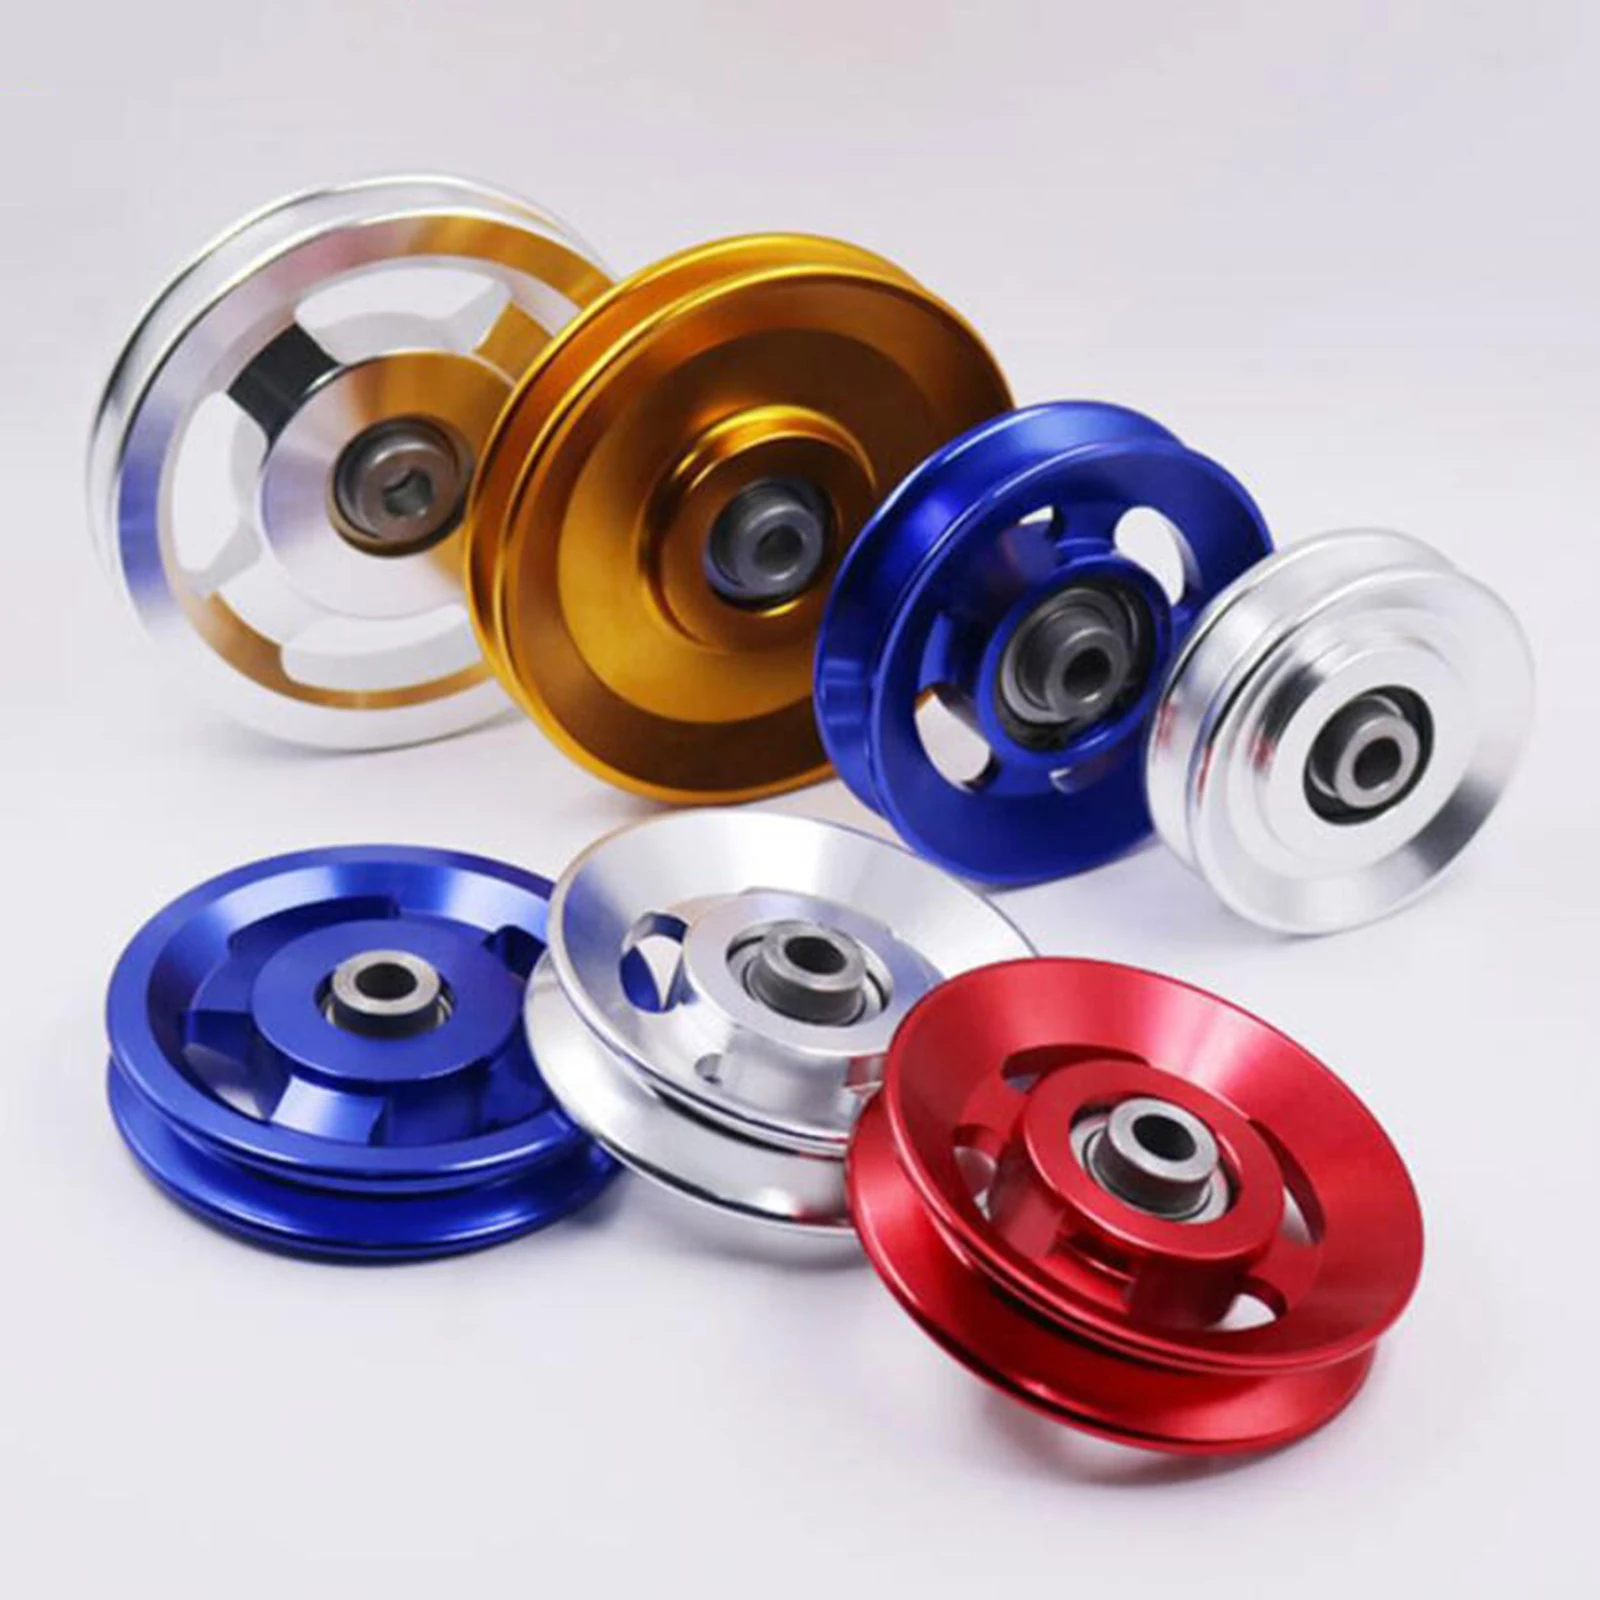 Universal Aluminium Alloy Bearing Pulley Wheel Gym Accessory for Fitness Equipment